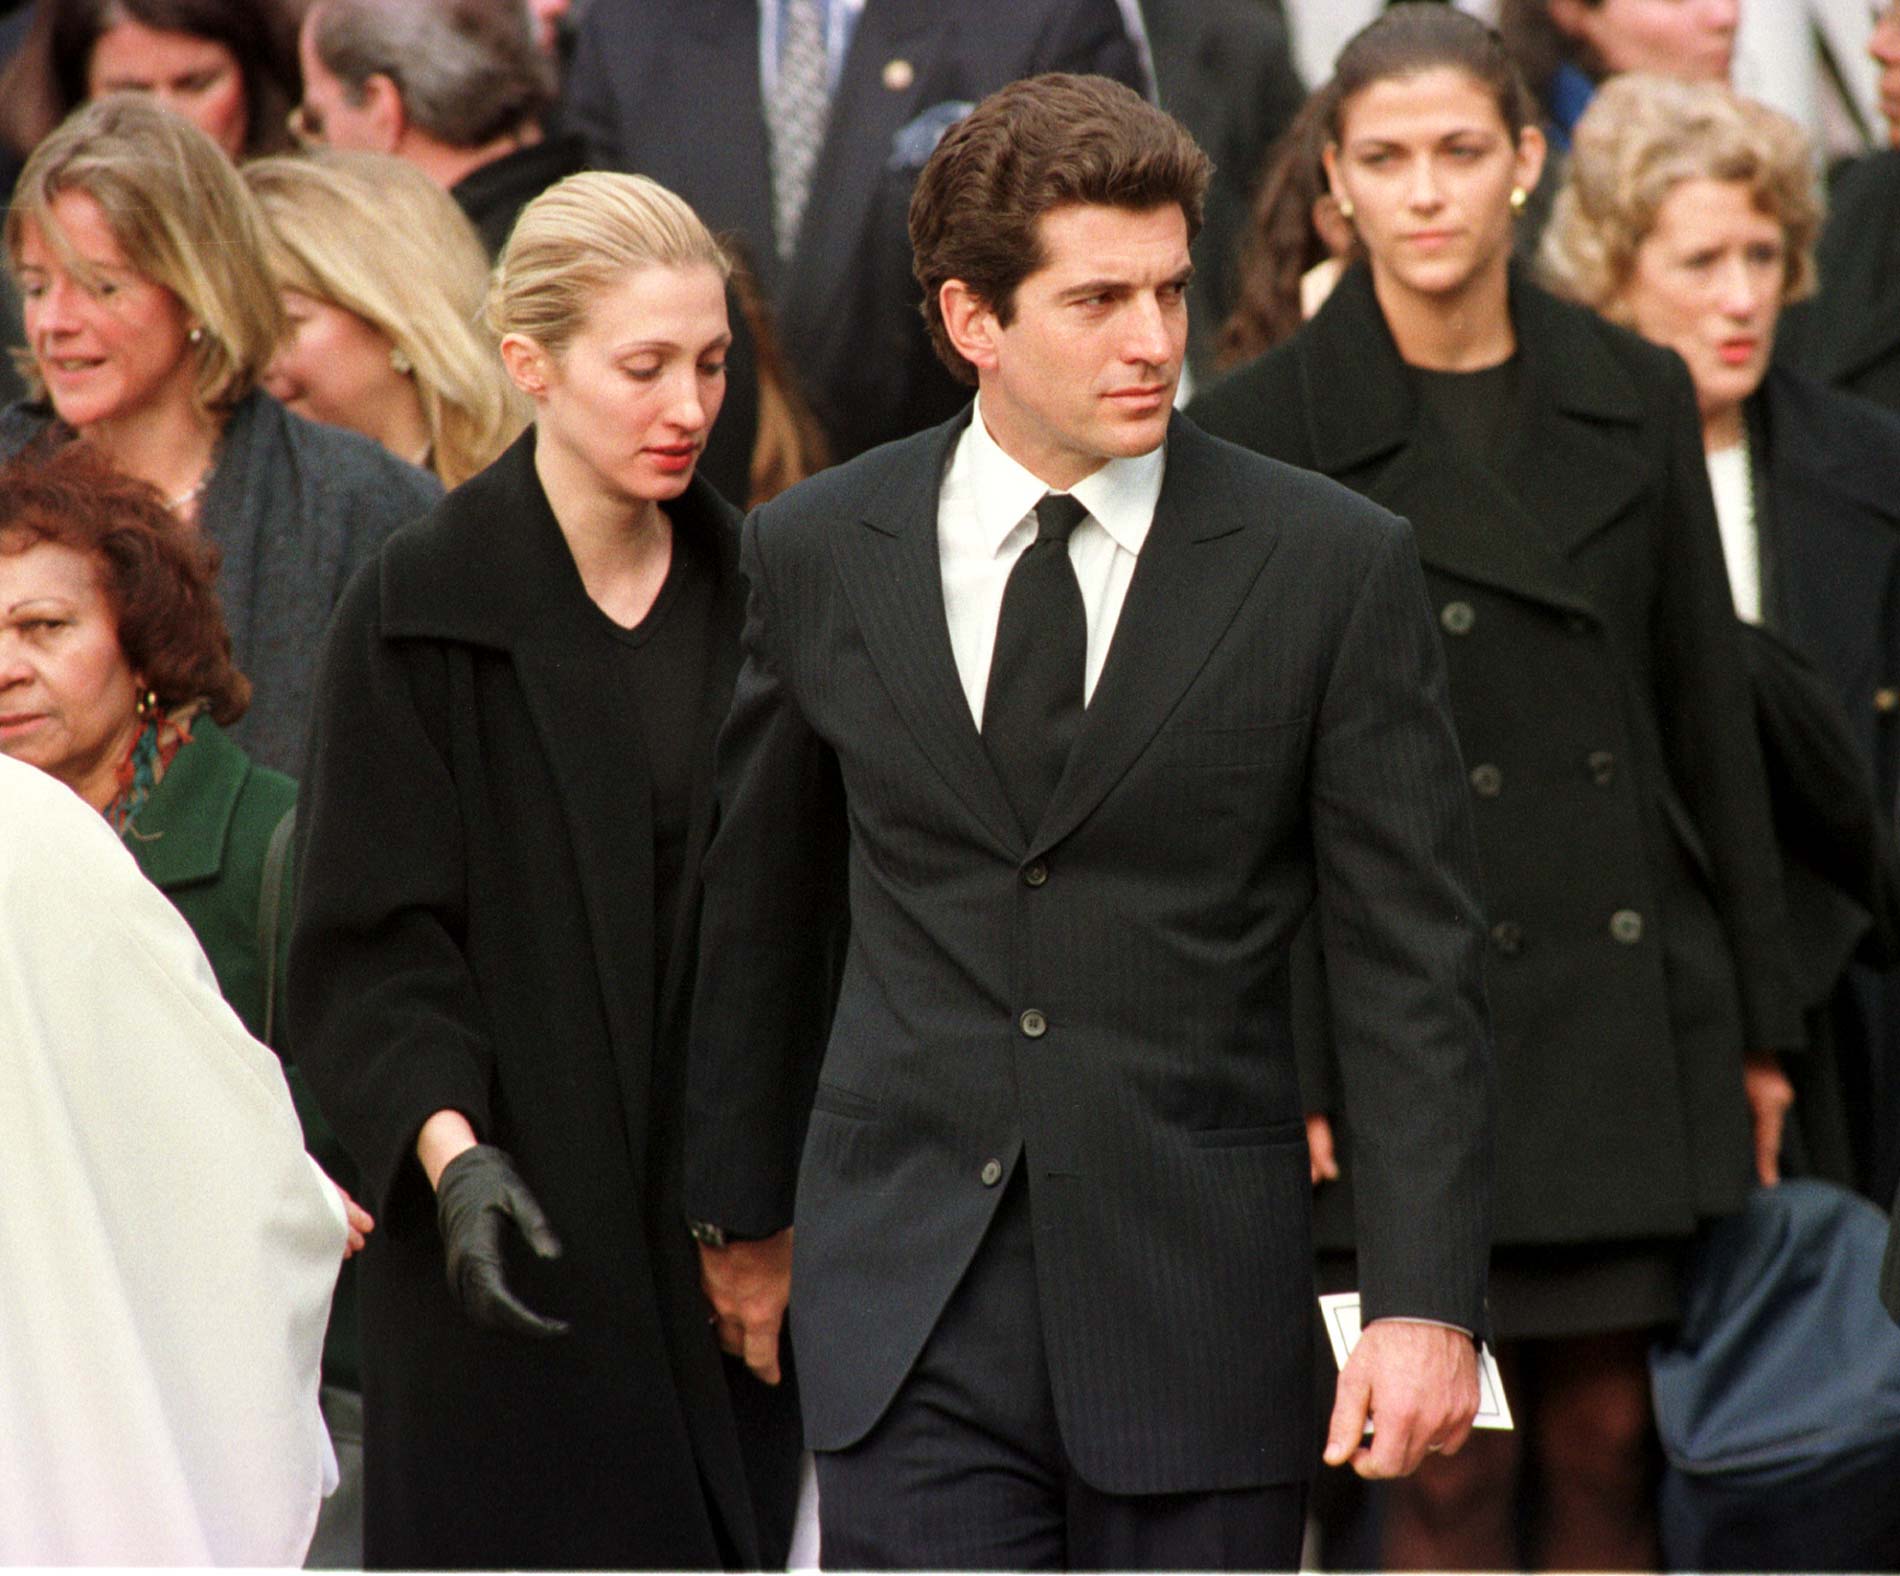 John F. Kennedy Jr. with his wife Carolyn after Michael Kennedy's funeral, Massachusetts, 1/3/98 | Photo: Getty Images